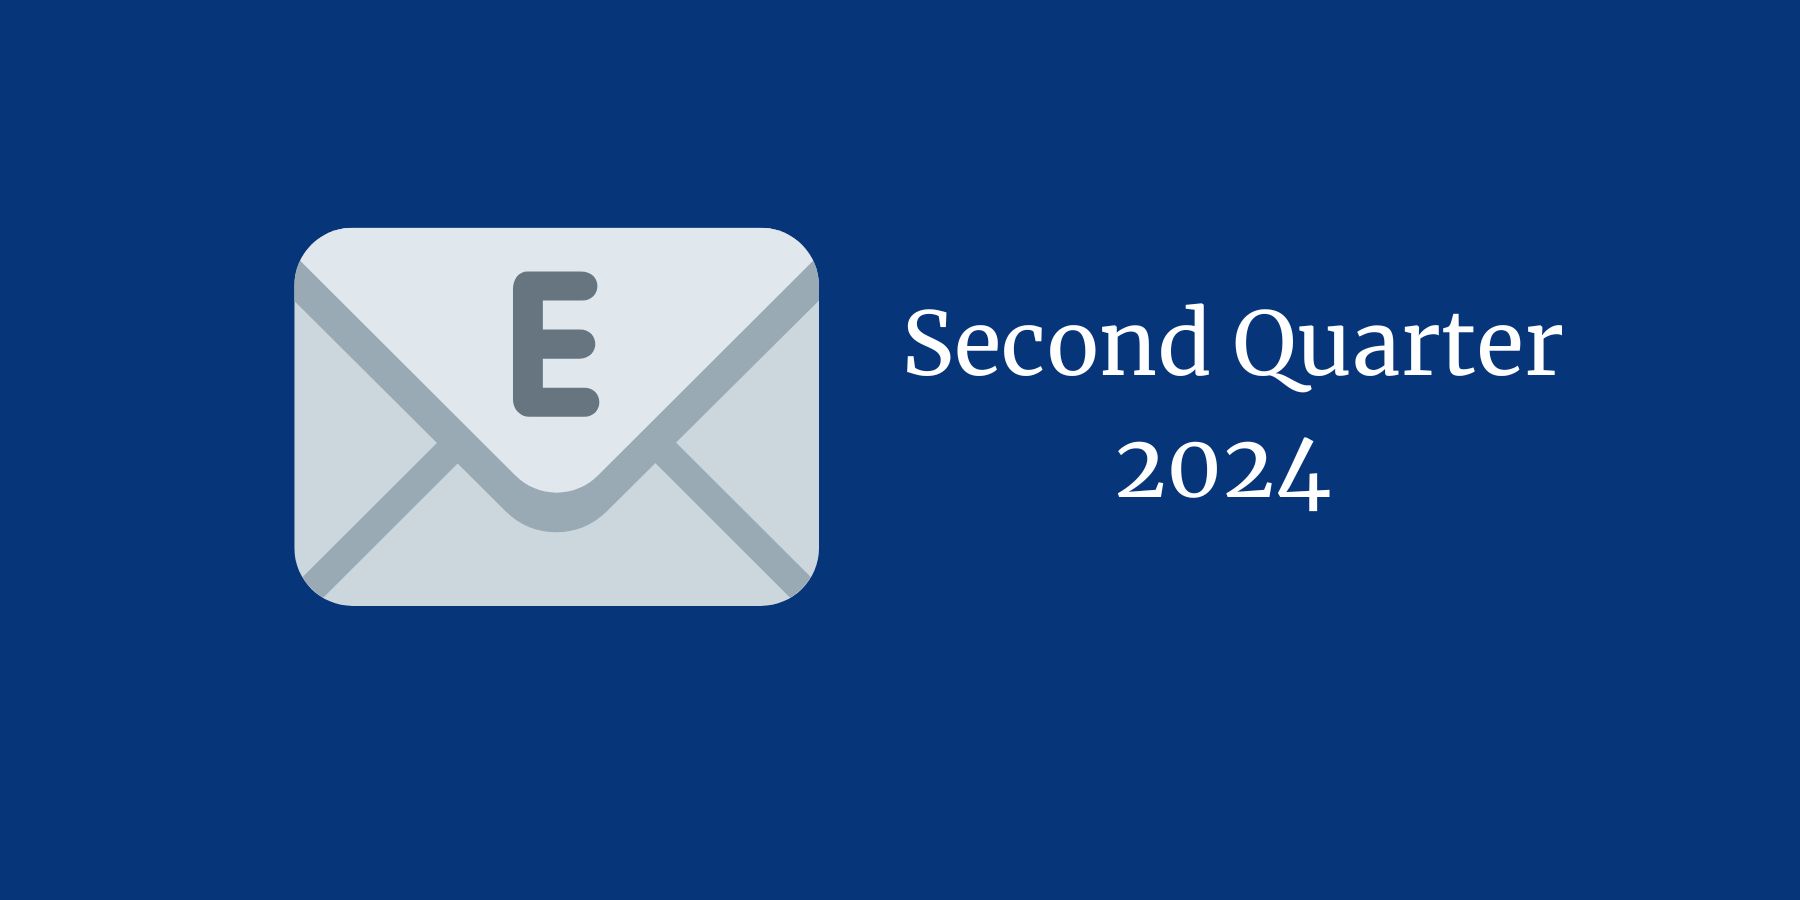 Email icon next to the words "Second Quarter 2024"